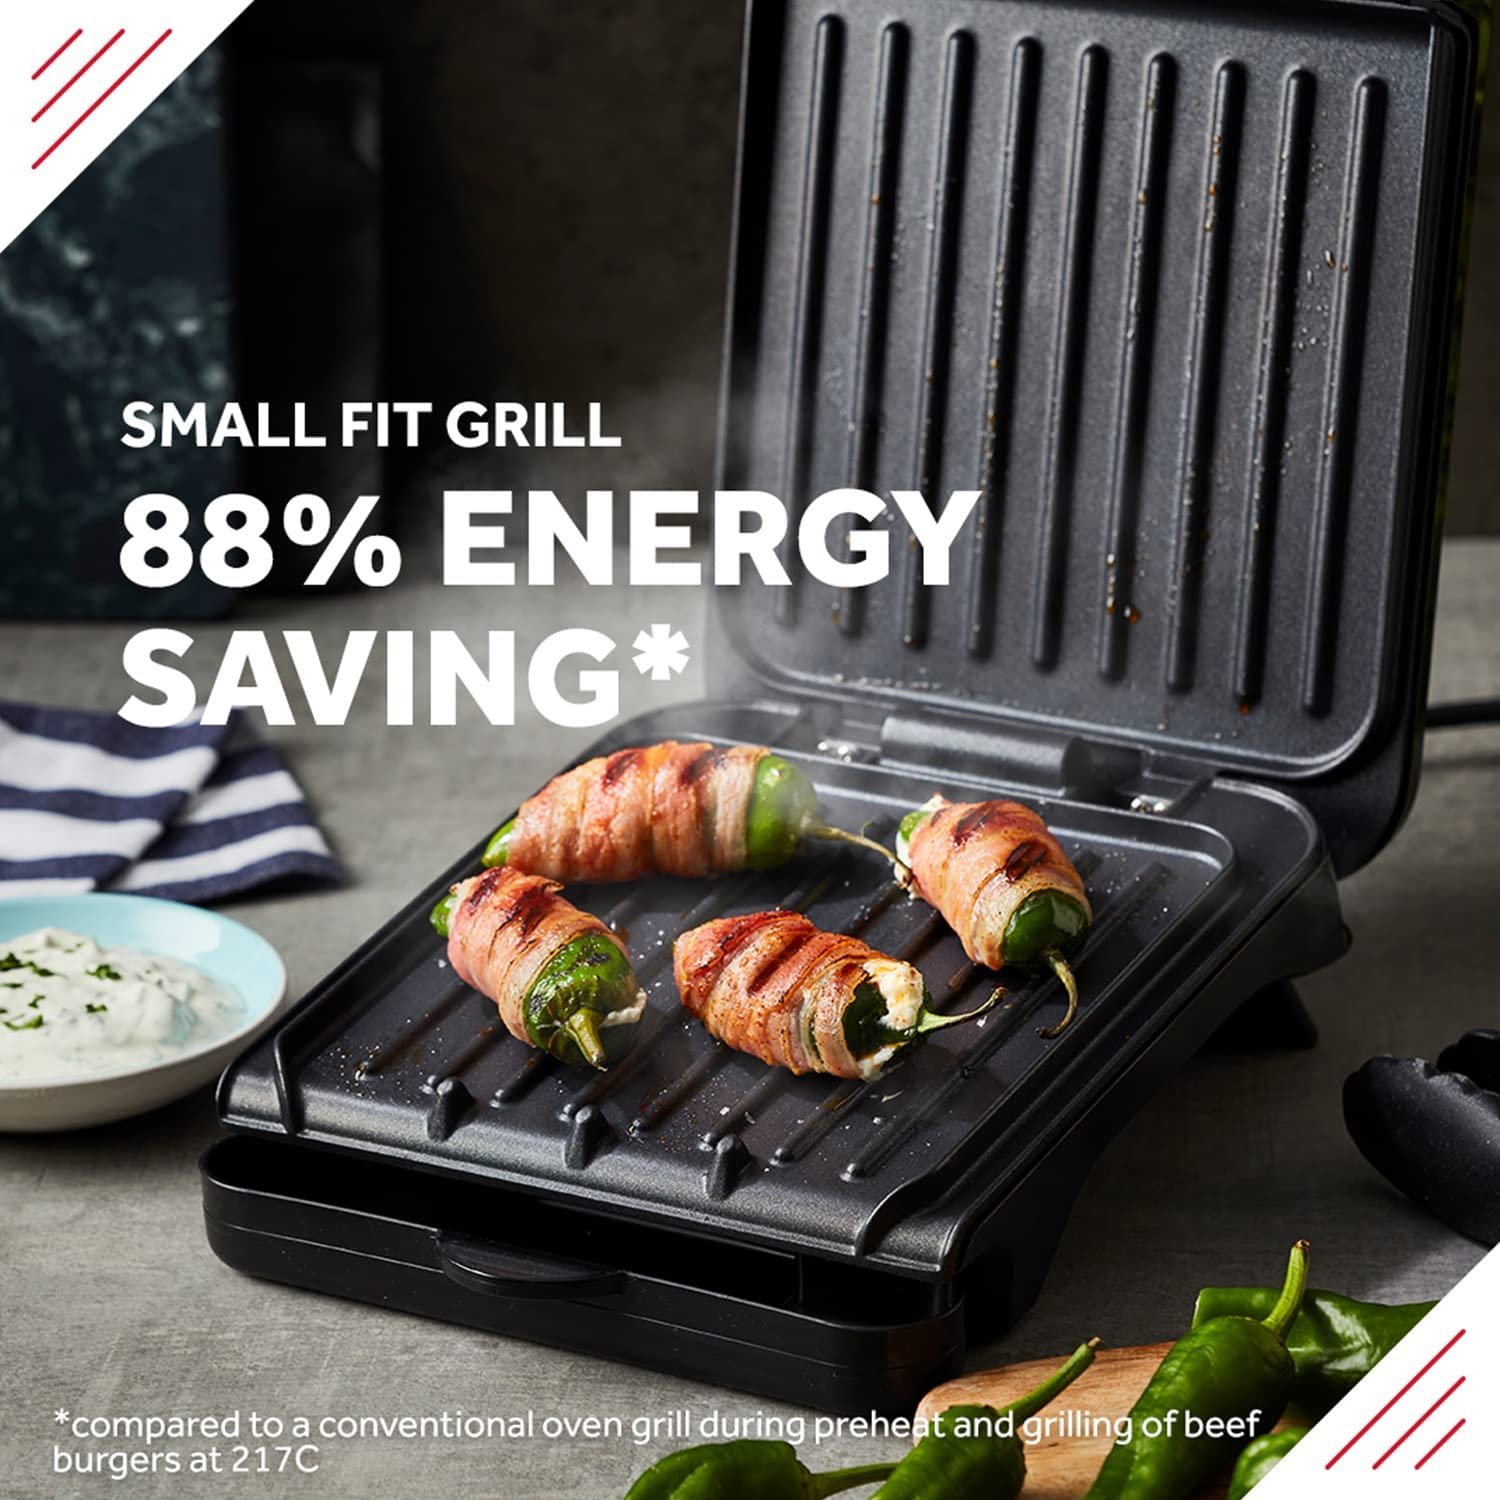 760W, entertaining, small fit, electric grill black, George Foreman 25800